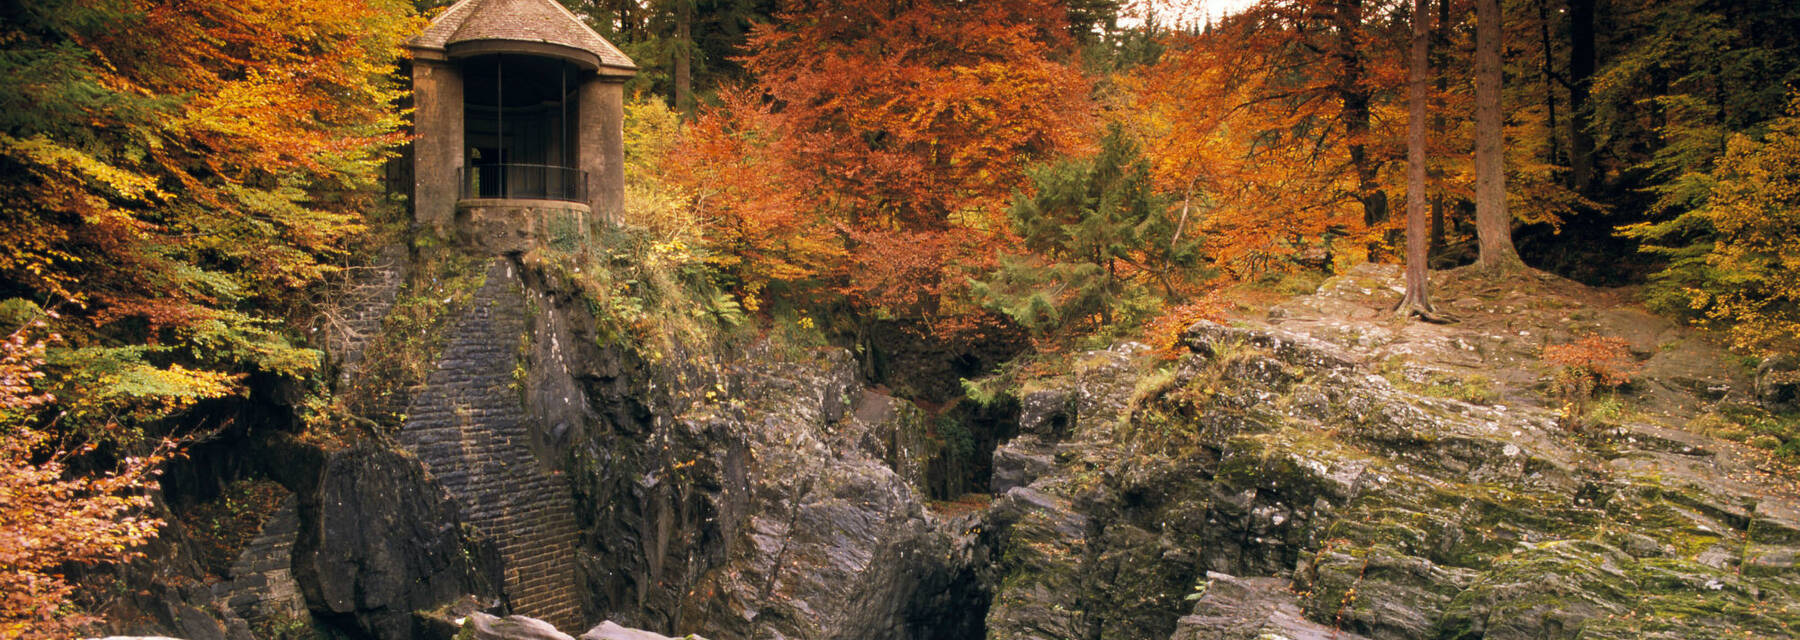 A folly stands on a rocky crag, overlooking a river falling over a waterfall. In the background is a forest bursting with rich autumn colour.